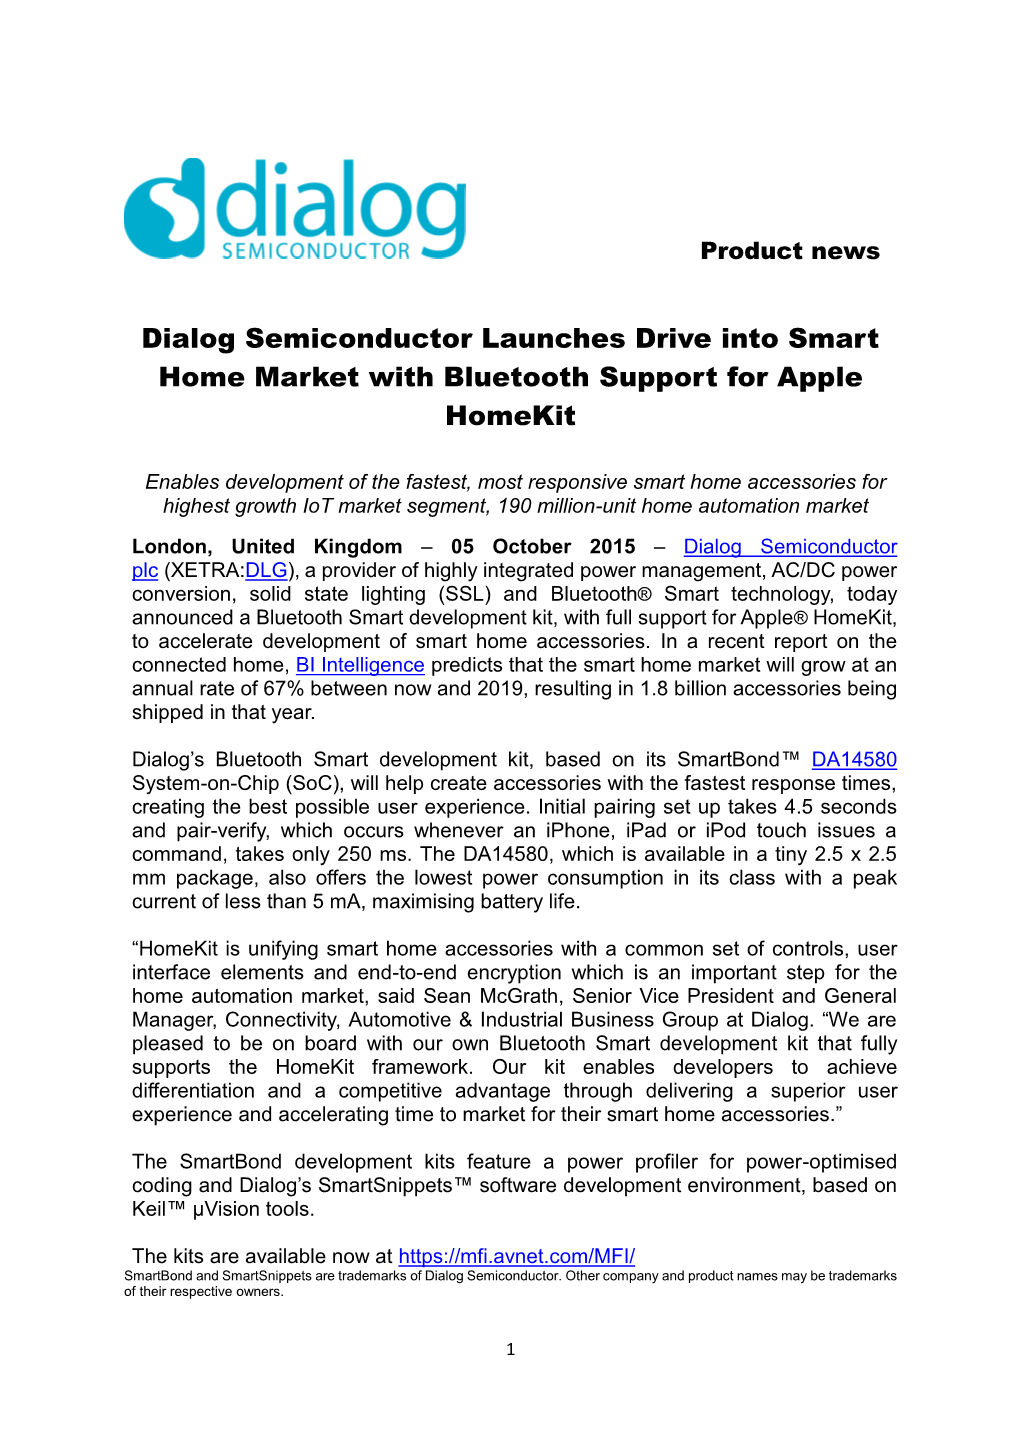 Dialog Semiconductor Launches Drive Into Smart Home Market with Bluetooth Support for Apple Homekit